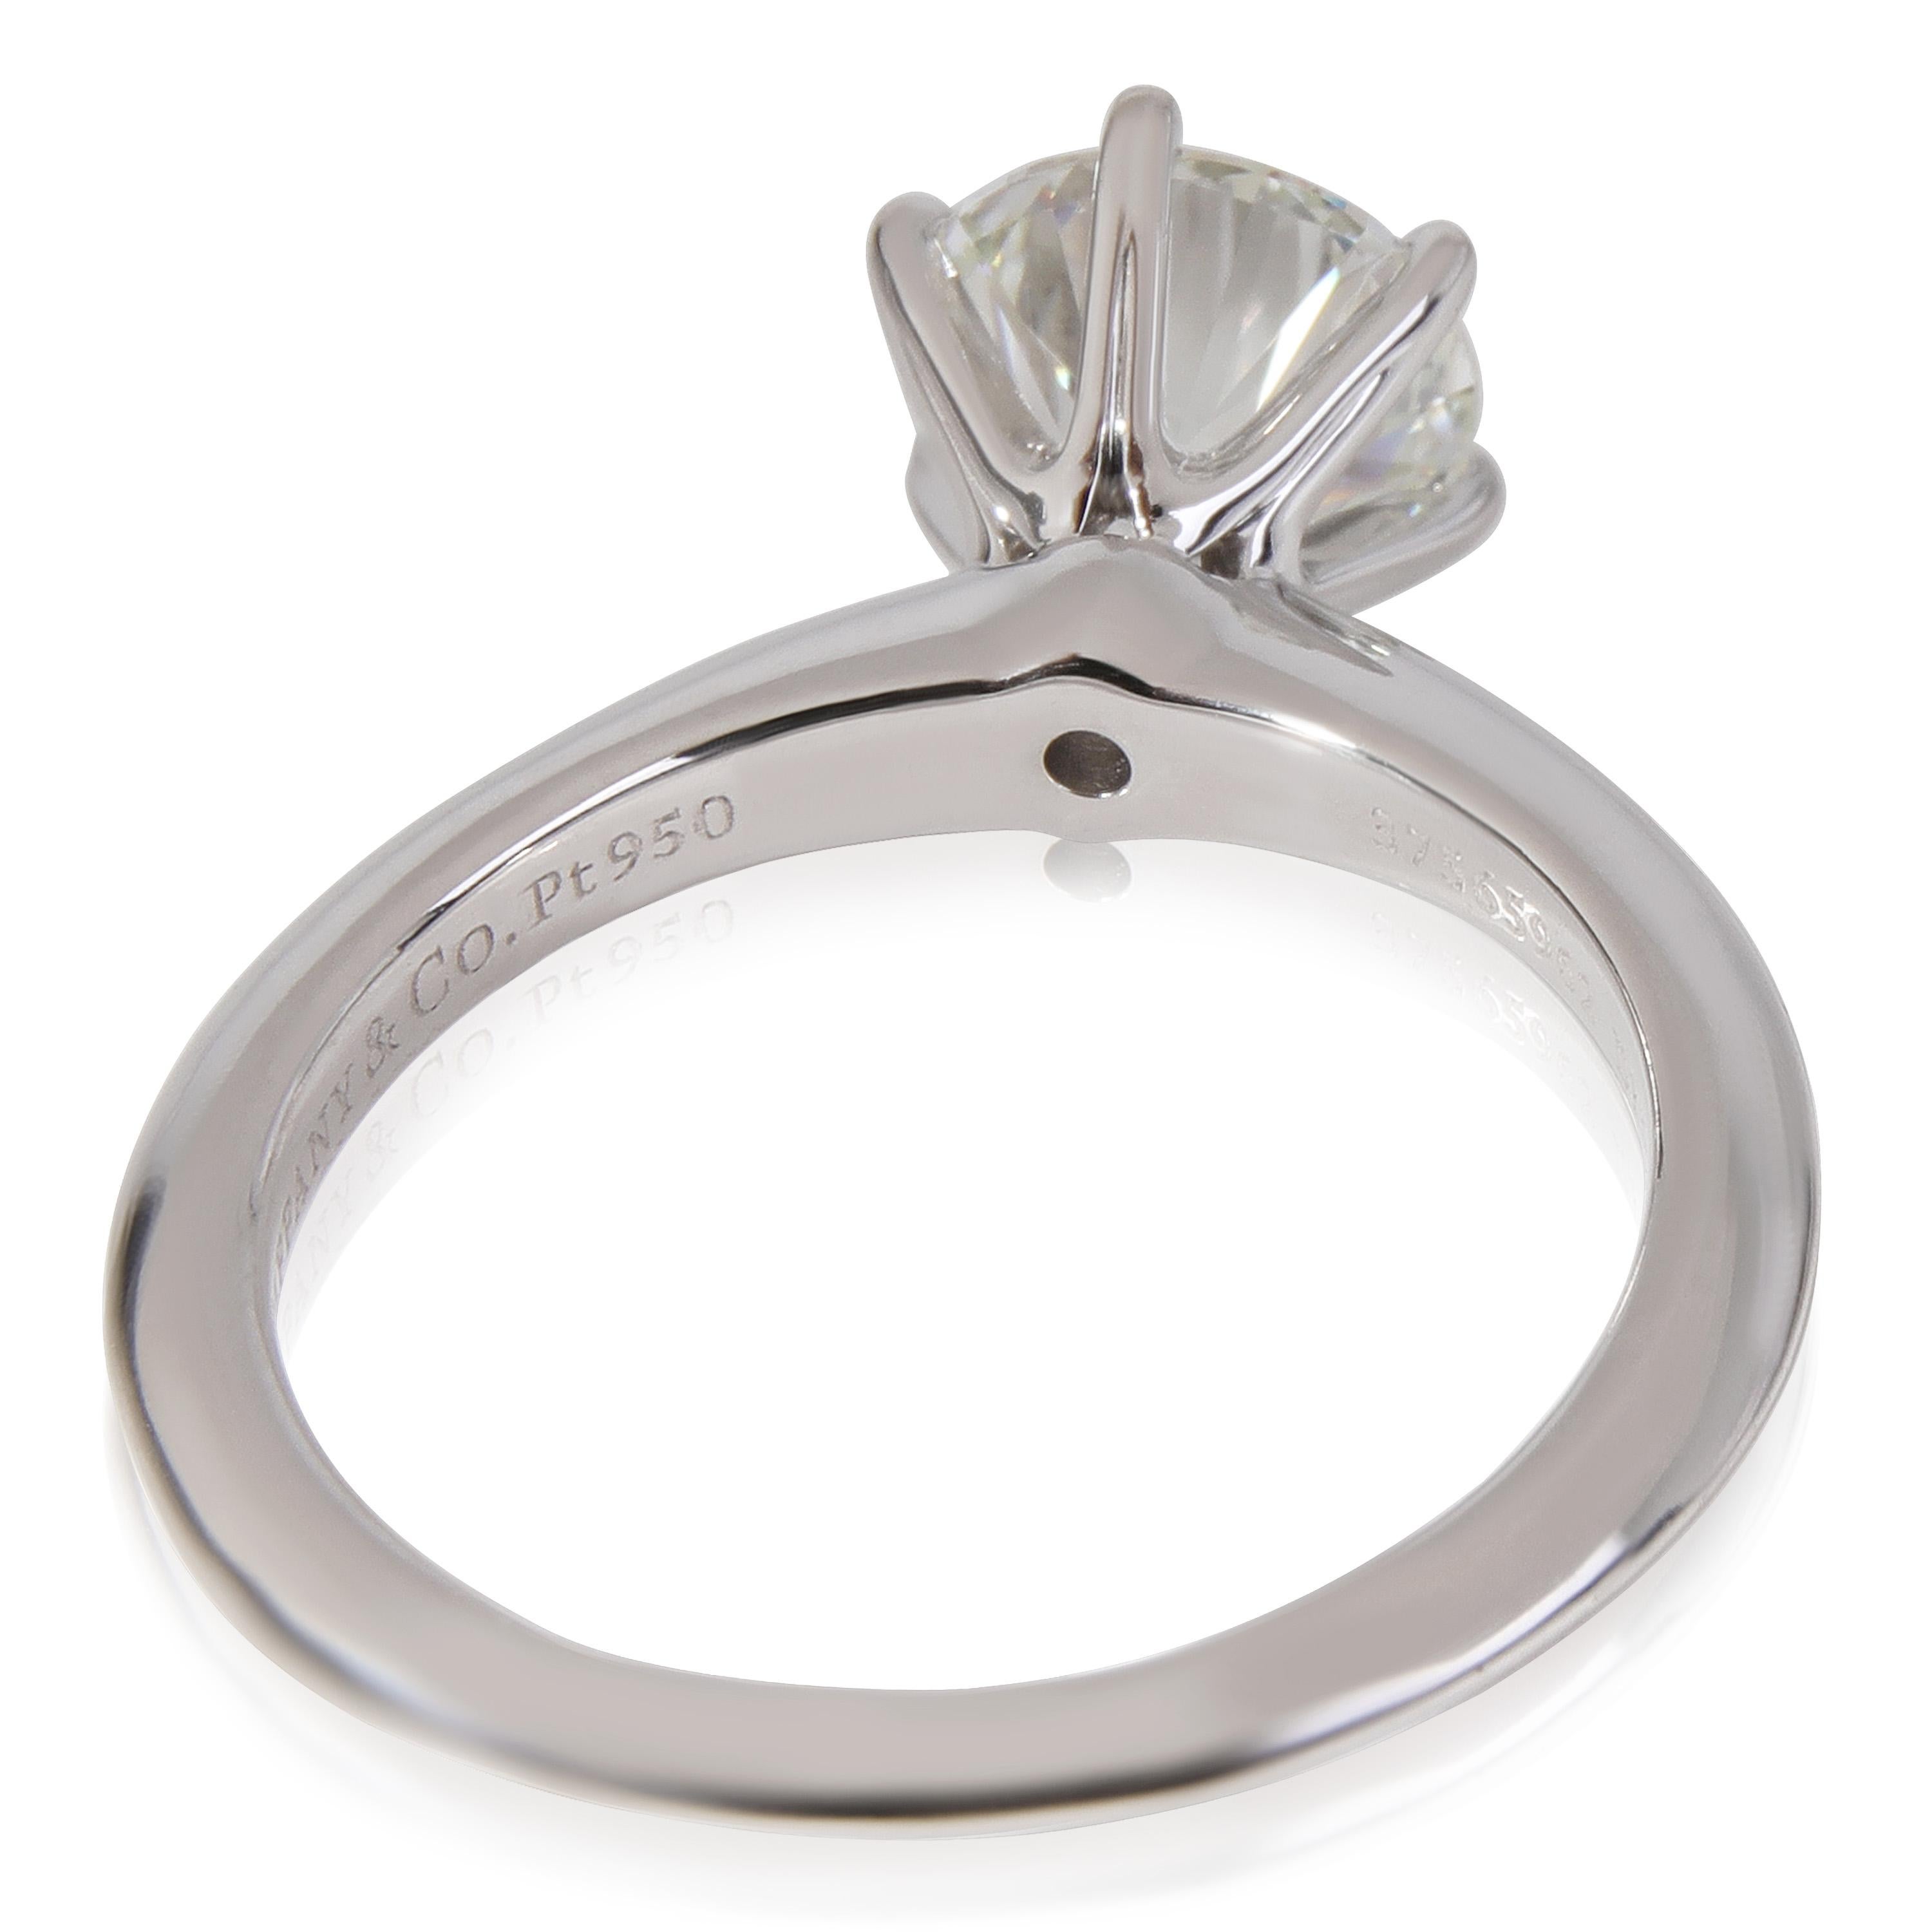 Tiffany & Co. Diamond Solitaire Engagement Ring in Platinum (1.20 ct I/VVS2)

PRIMARY DETAILS
SKU: 121190
Listing Title: Tiffany & Co. Diamond Solitaire Engagement Ring in Platinum (1.20 ct I/VVS2)
Condition Description: Retails for 18100 USD. In